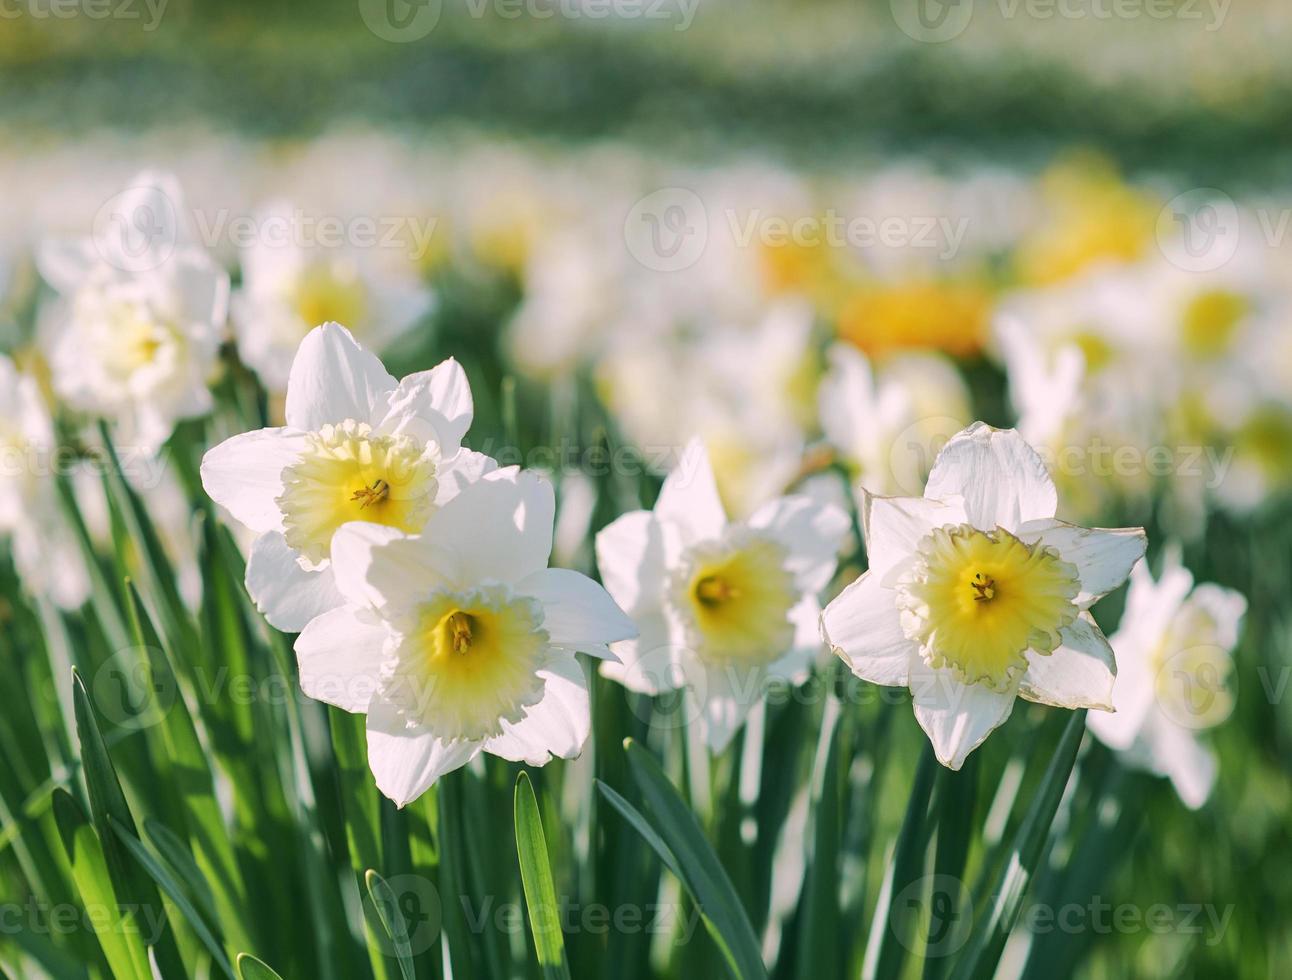 field of white and yellow daffodils in spring sunny day photo